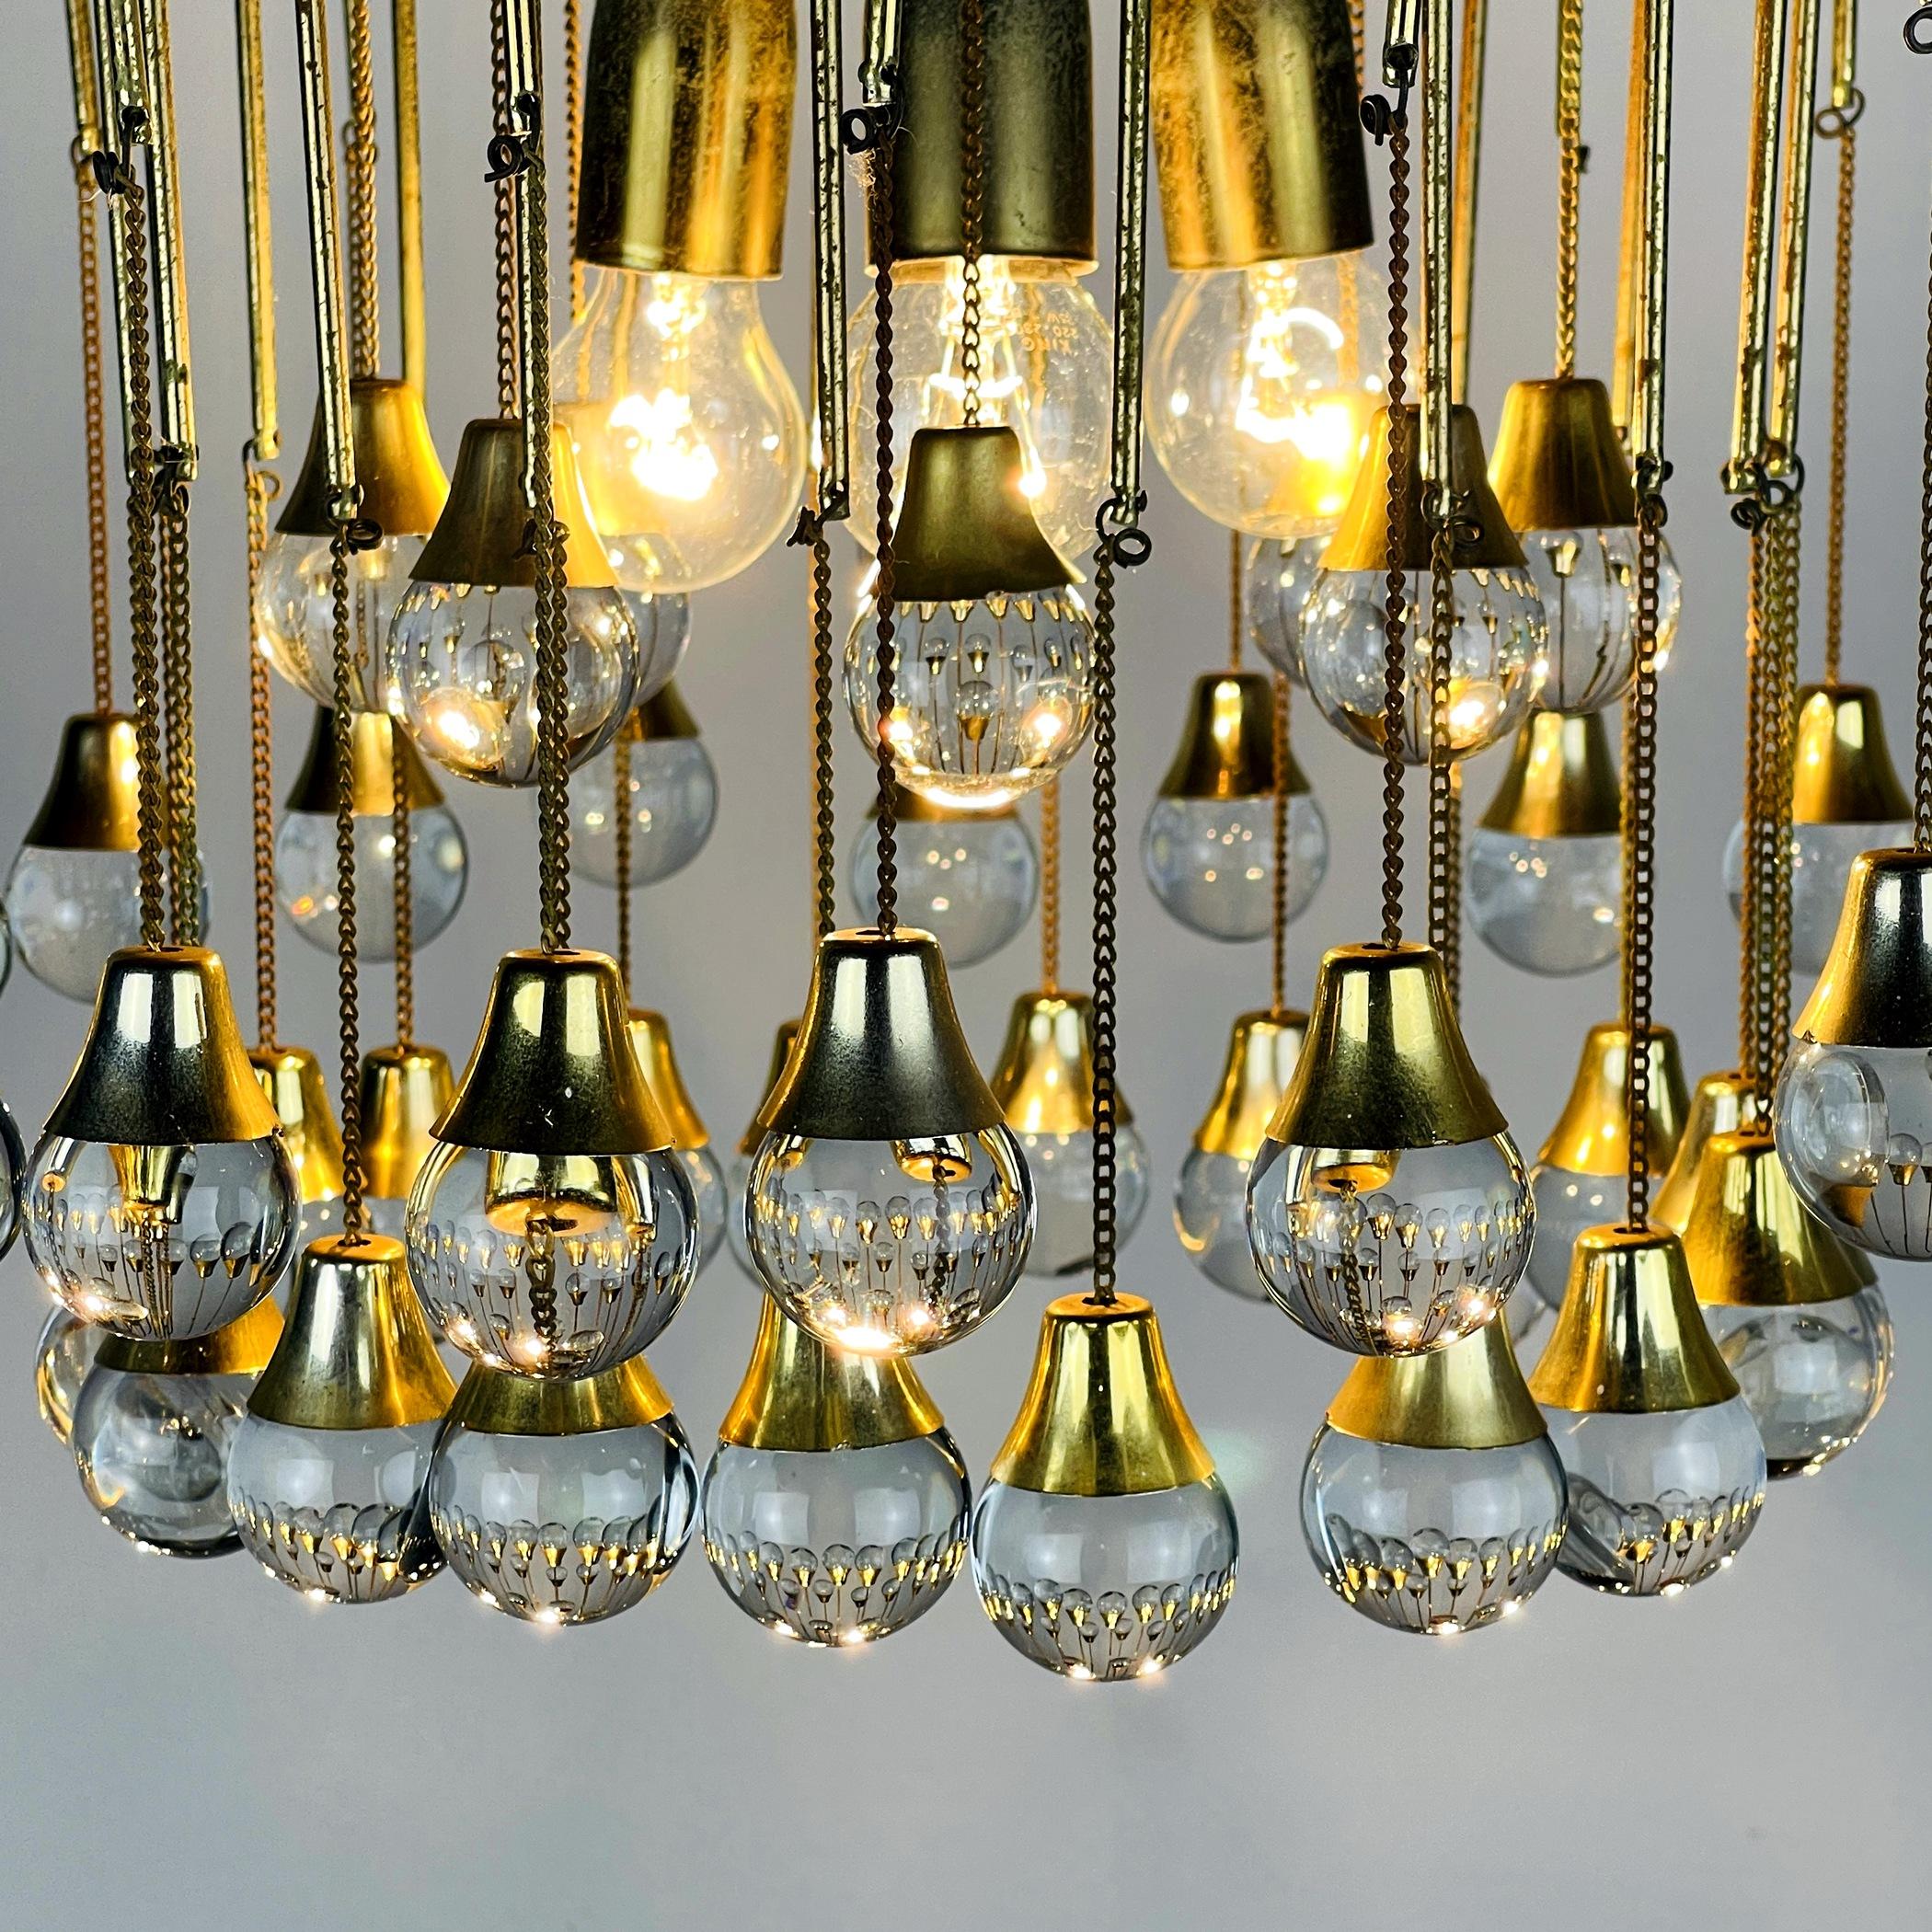 Mid-20th Century Vintage Cascade Glass Chandelier Italy 1960s Brass and 48 Glass Balls